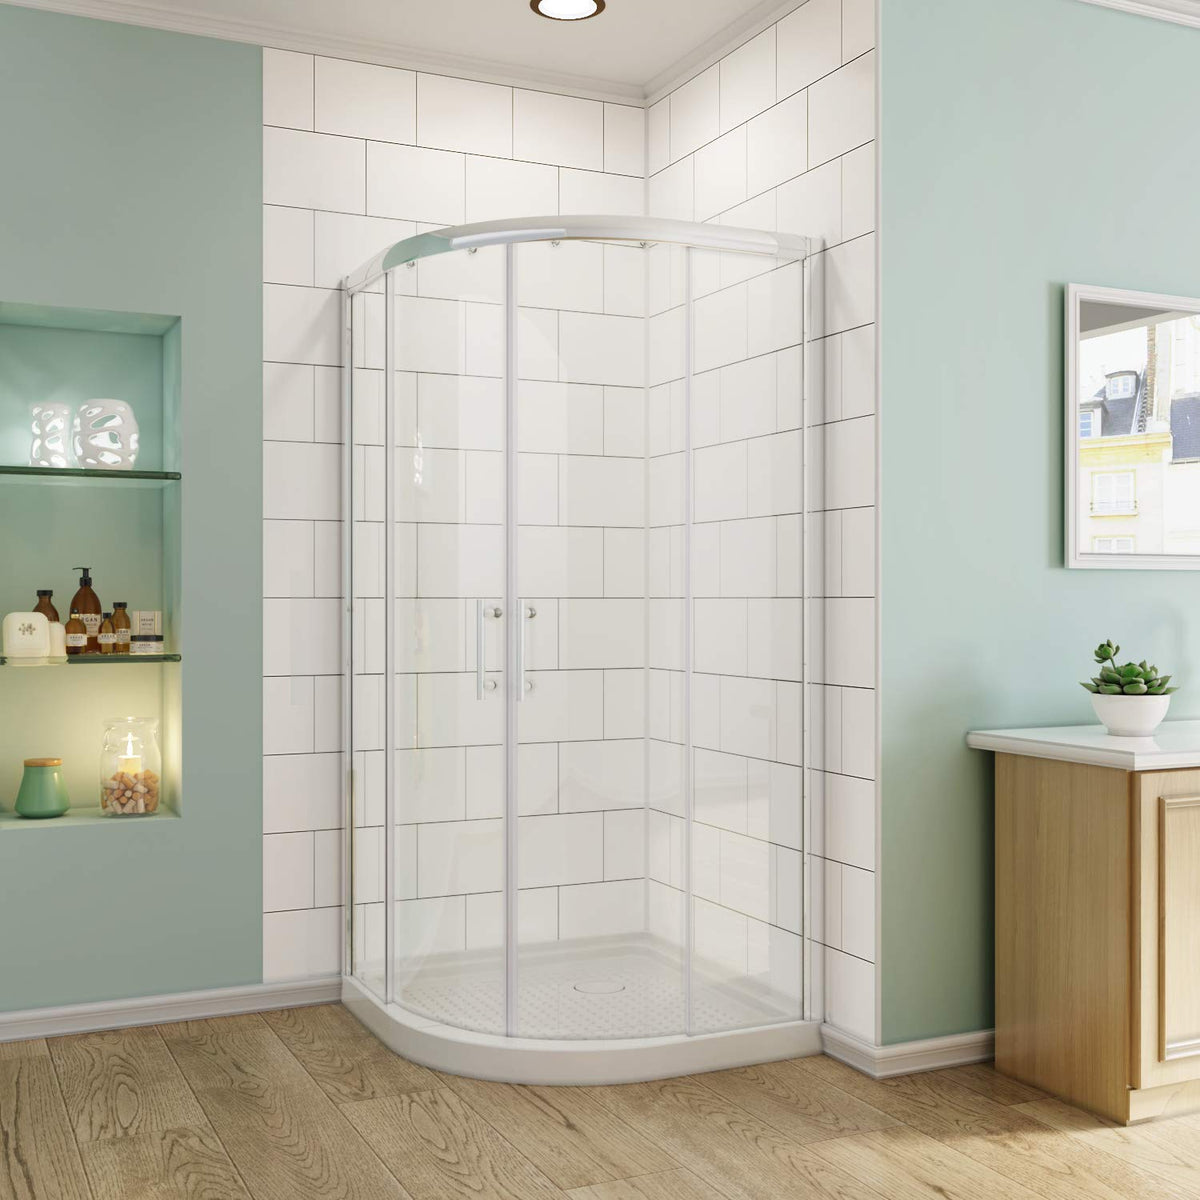 SUNNY SHOWER 37.5 in. D x 37.5 in. W x 72 in. H Chrome Finish Quadrant Enclosures With Sliding Doors And White Quadrant Base - SUNNY SHOWER